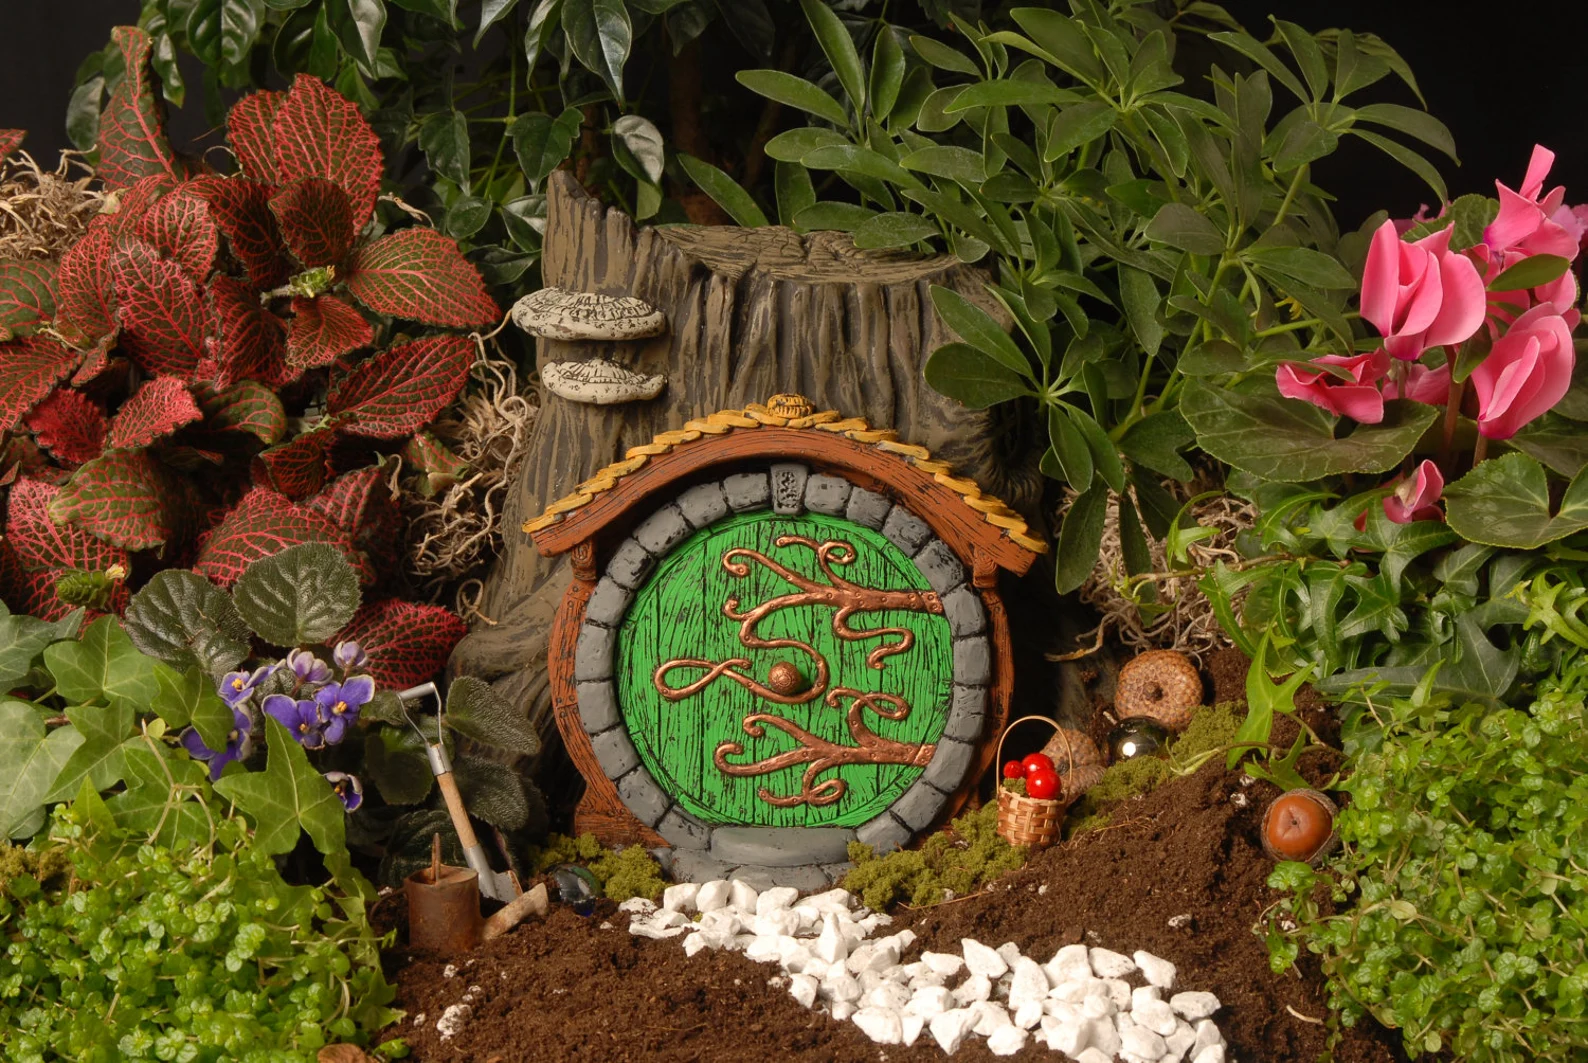 A small round green door is set at the base of a small stump, surrounded by plants, mini tools and baskets, and a tiny path made of small stones.